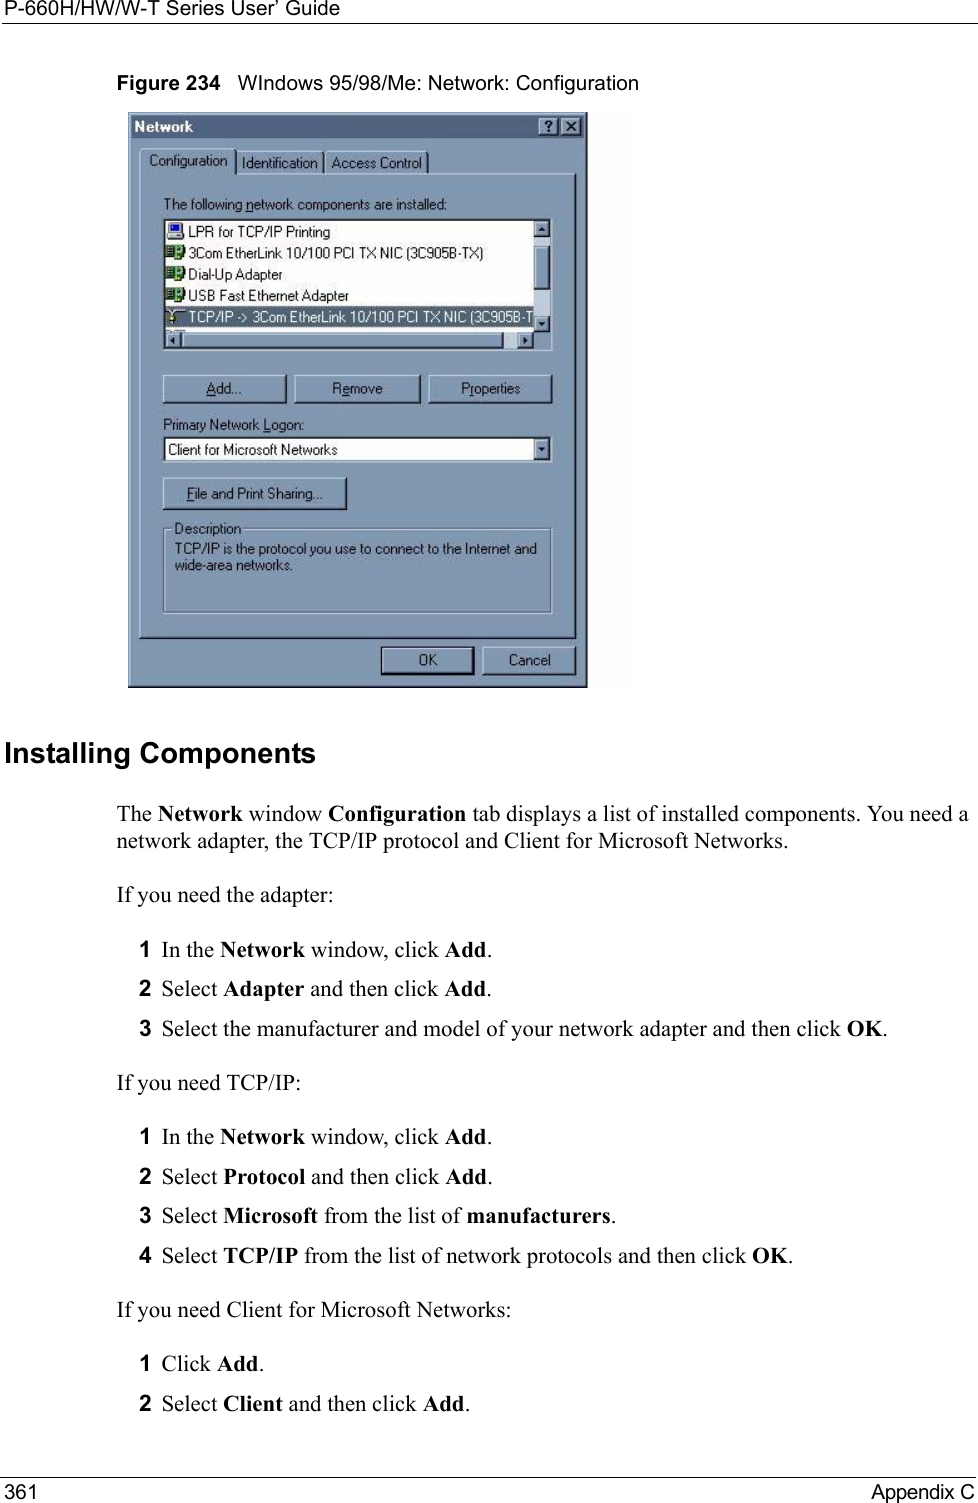 P-660H/HW/W-T Series User’ Guide361 Appendix CFigure 234   WIndows 95/98/Me: Network: ConfigurationInstalling ComponentsThe Network window Configuration tab displays a list of installed components. You need a network adapter, the TCP/IP protocol and Client for Microsoft Networks.If you need the adapter:1In the Network window, click Add.2Select Adapter and then click Add.3Select the manufacturer and model of your network adapter and then click OK.If you need TCP/IP:1In the Network window, click Add.2Select Protocol and then click Add.3Select Microsoft from the list of manufacturers.4Select TCP/IP from the list of network protocols and then click OK.If you need Client for Microsoft Networks:1Click Add.2Select Client and then click Add.